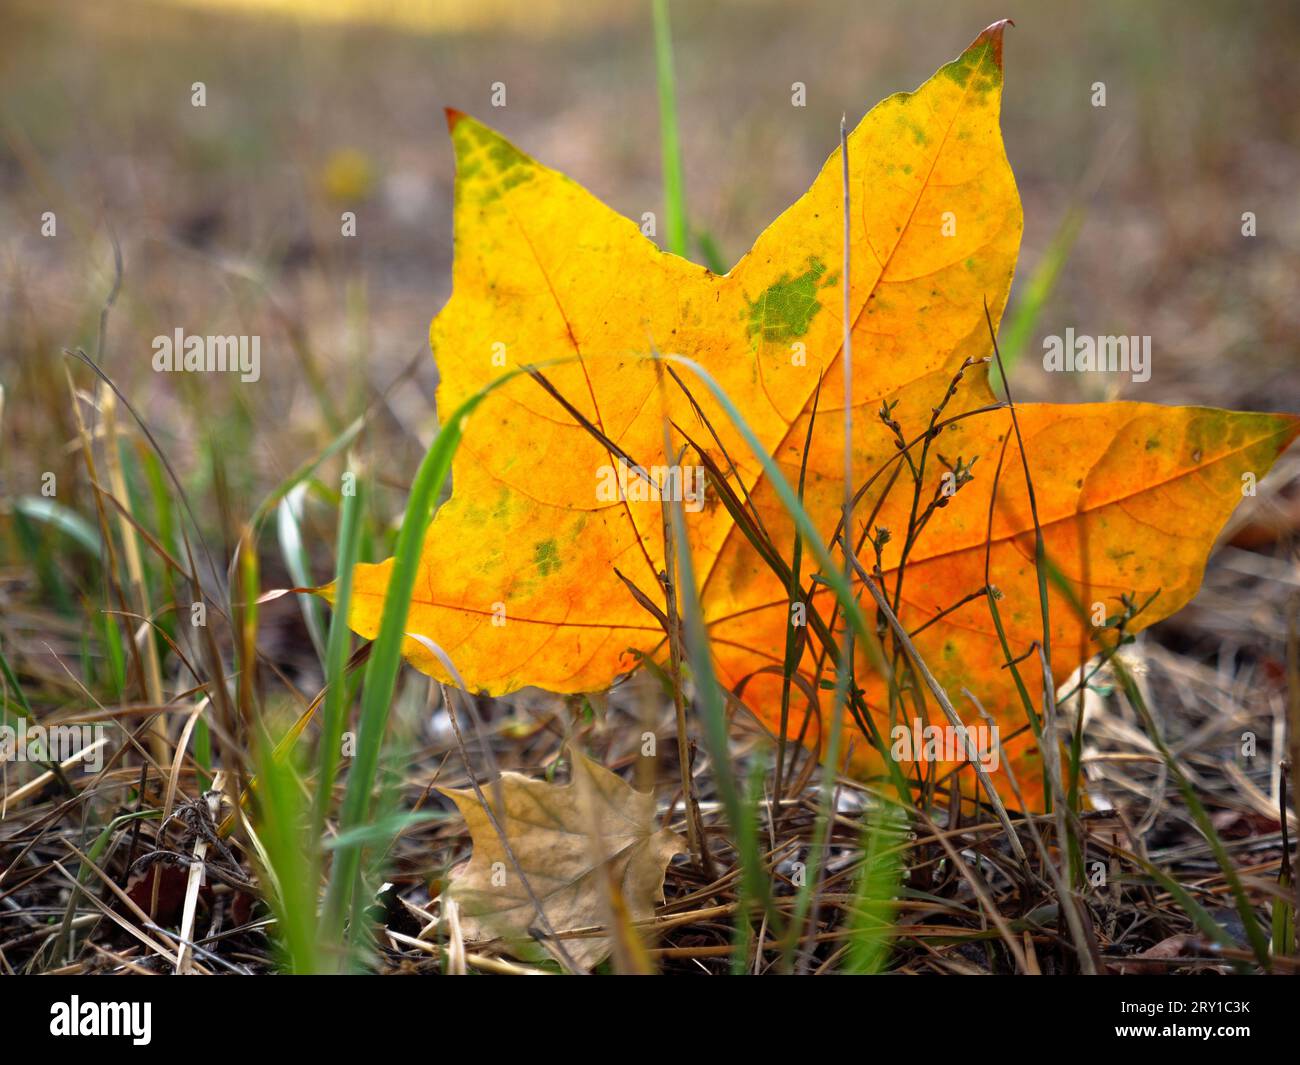 Beautiful orange and green star-like autumn maple leaf fallen from the tree and stuck on the rib in dry grass. Golden fall background. Stock Photo